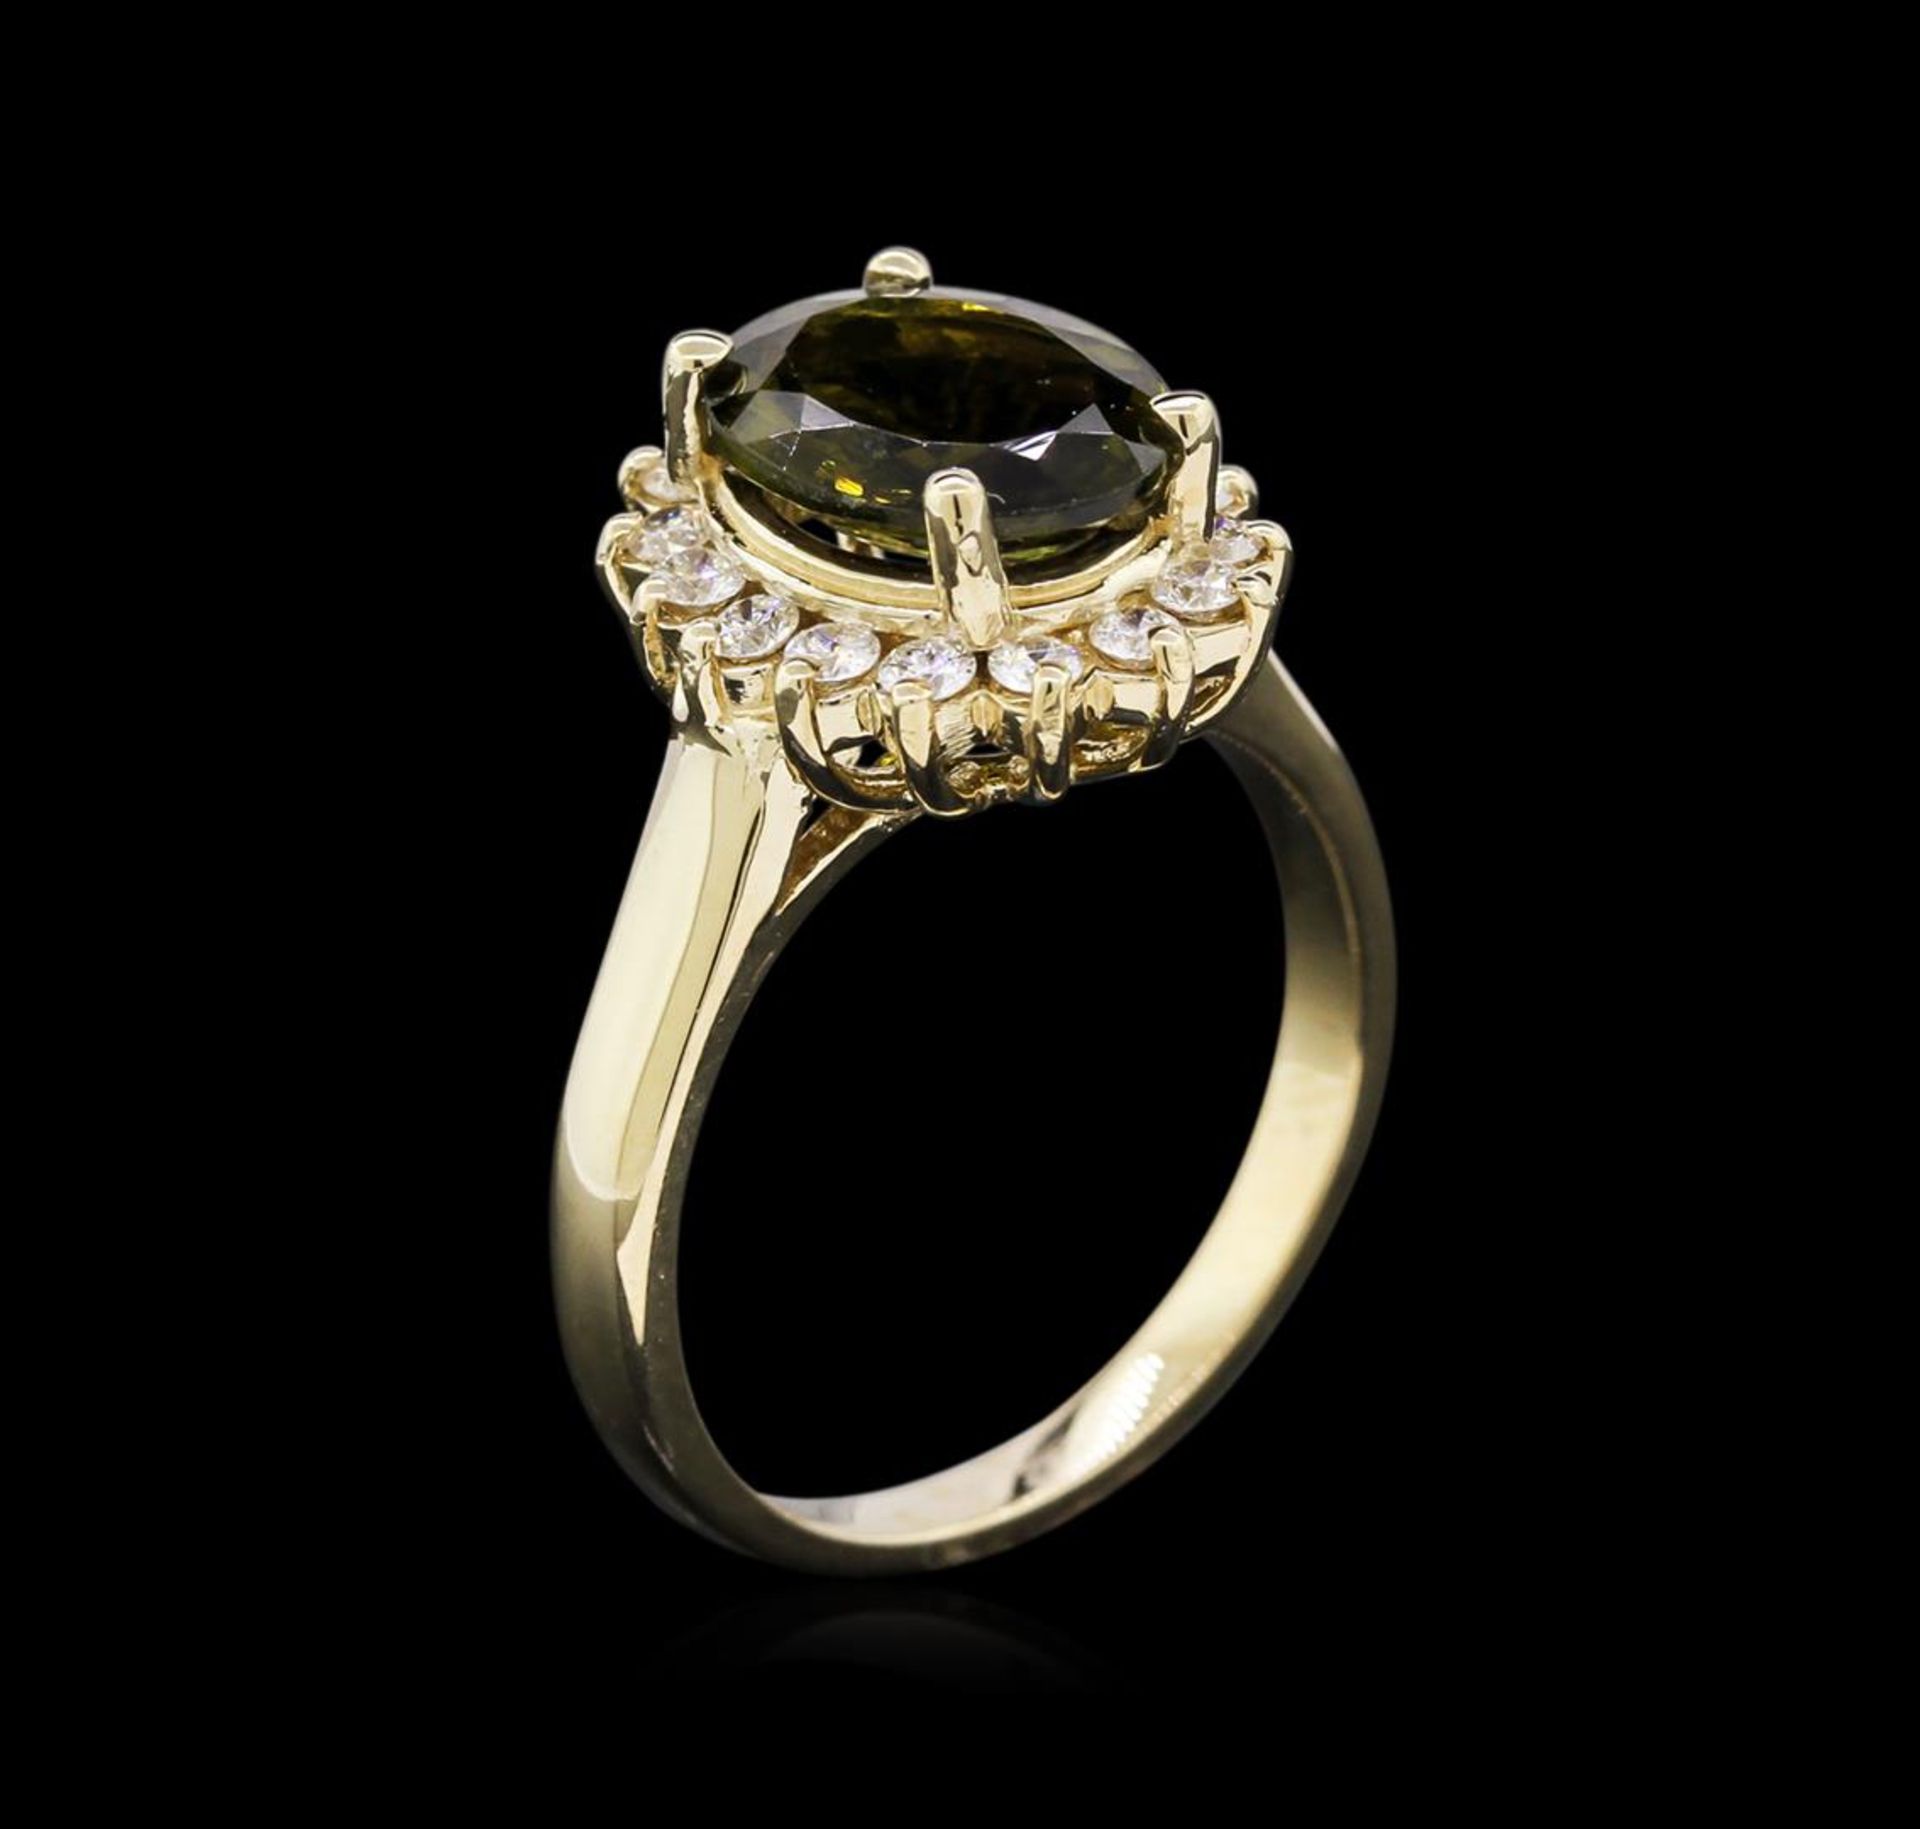 2.63 ctw Green Tourmaline and Diamond Ring - 14KT Yellow Gold - Image 3 of 3